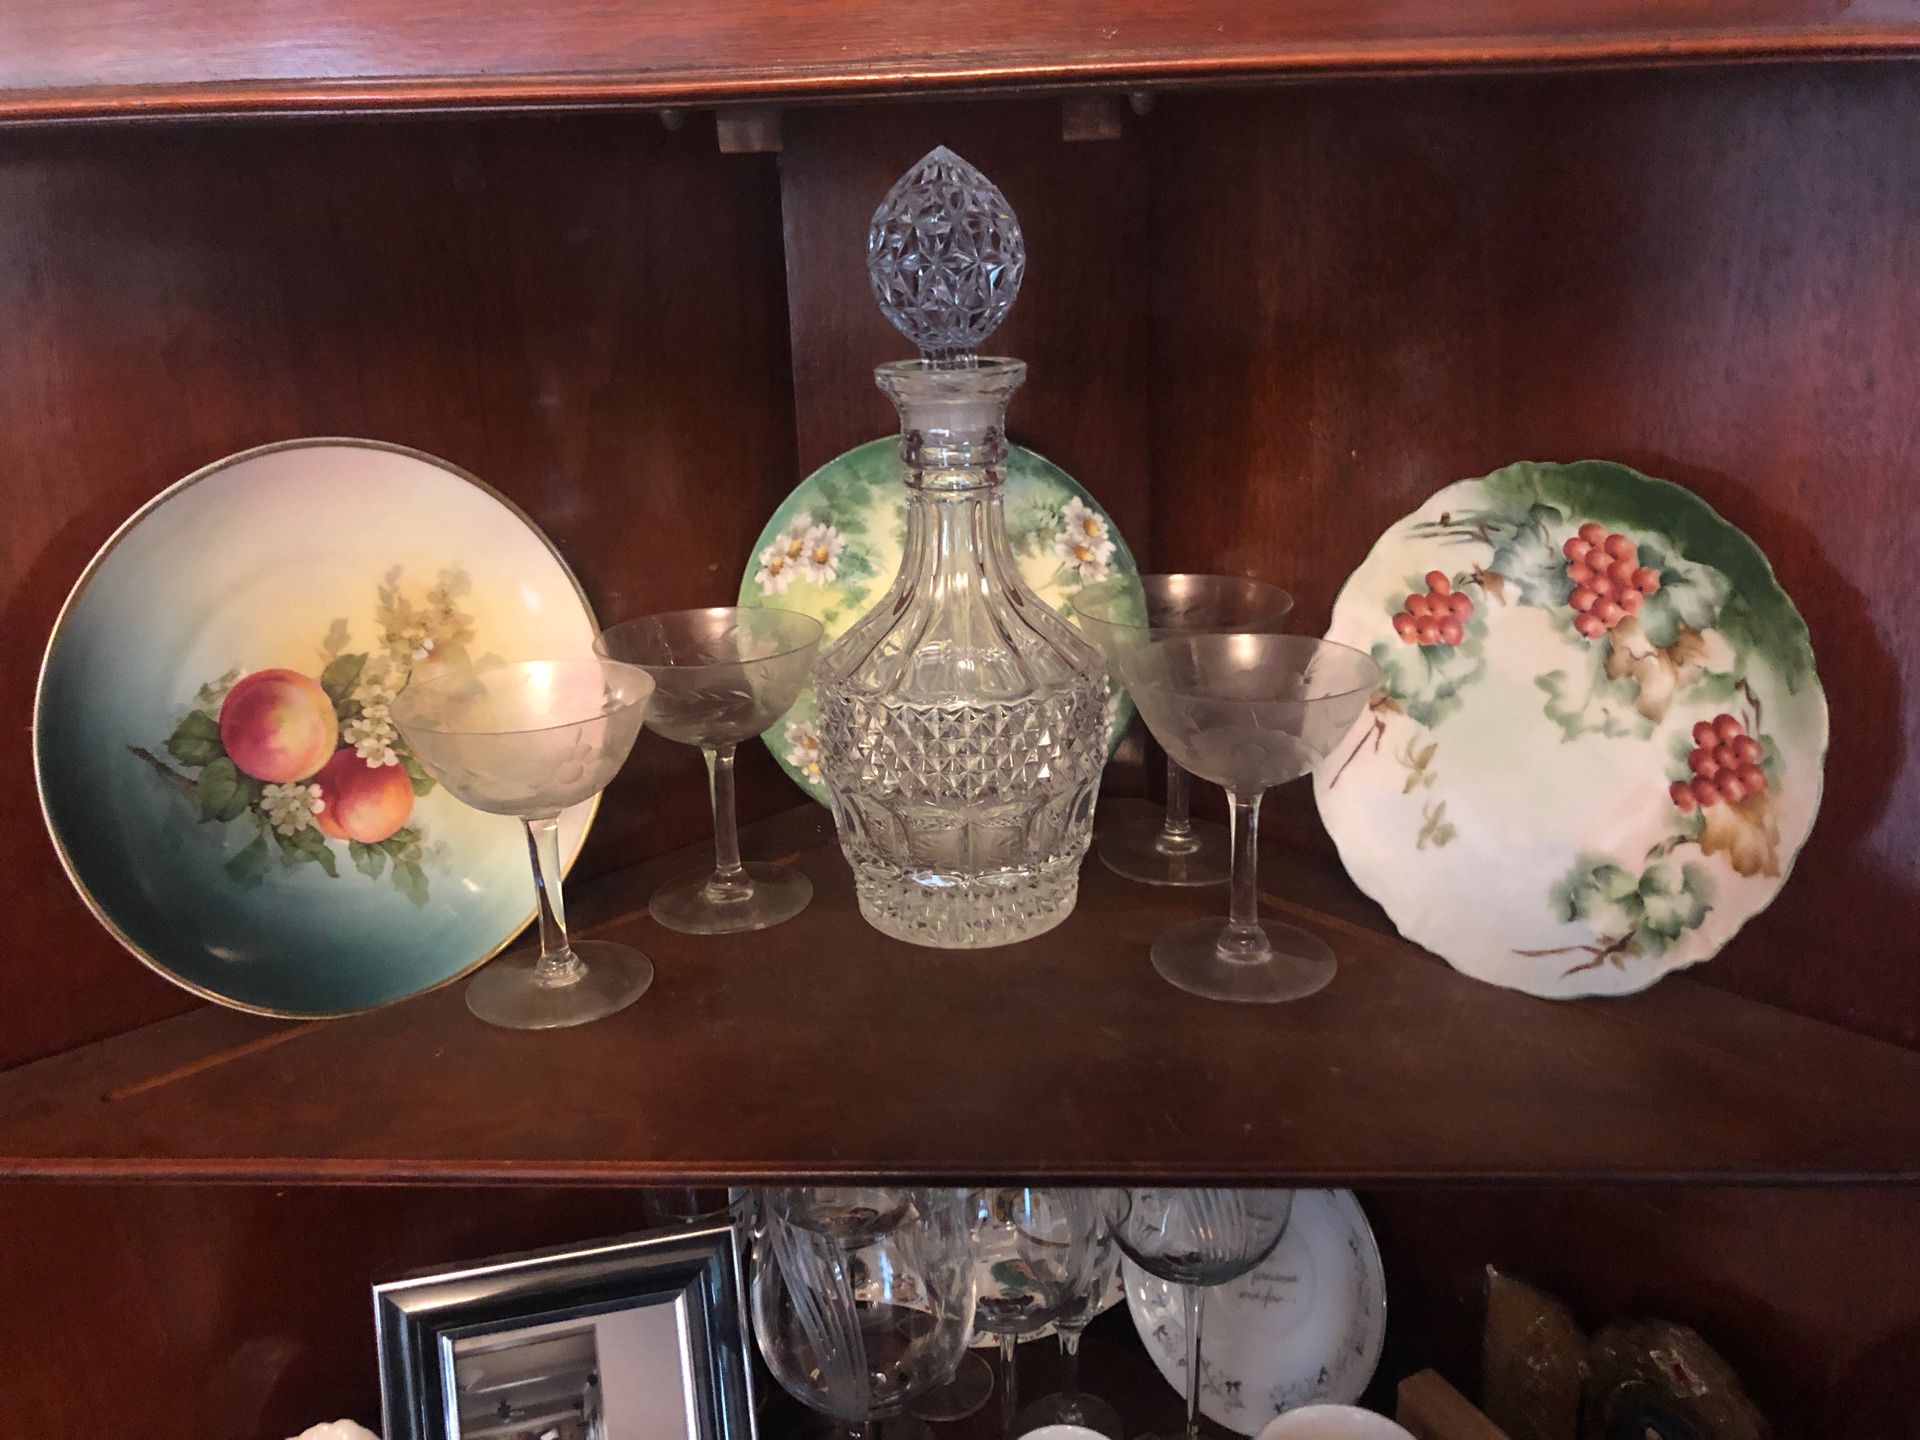 Decanter,Glasses, Plates collectibles